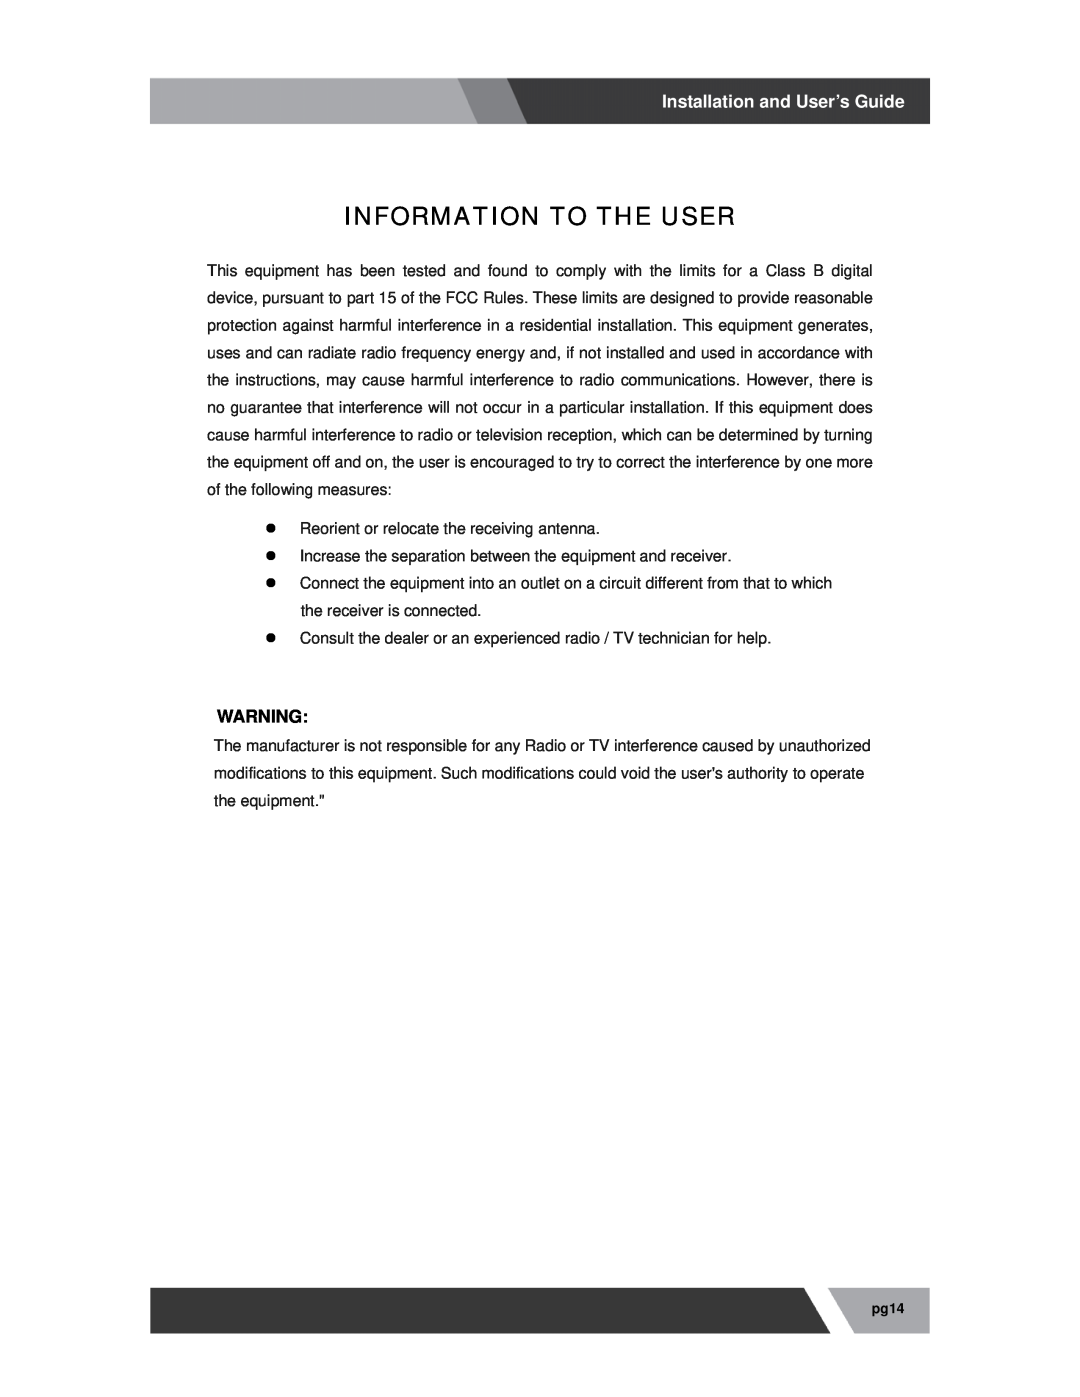 Orion 23REDB manual Information To The User, Installation and User’s Guide 